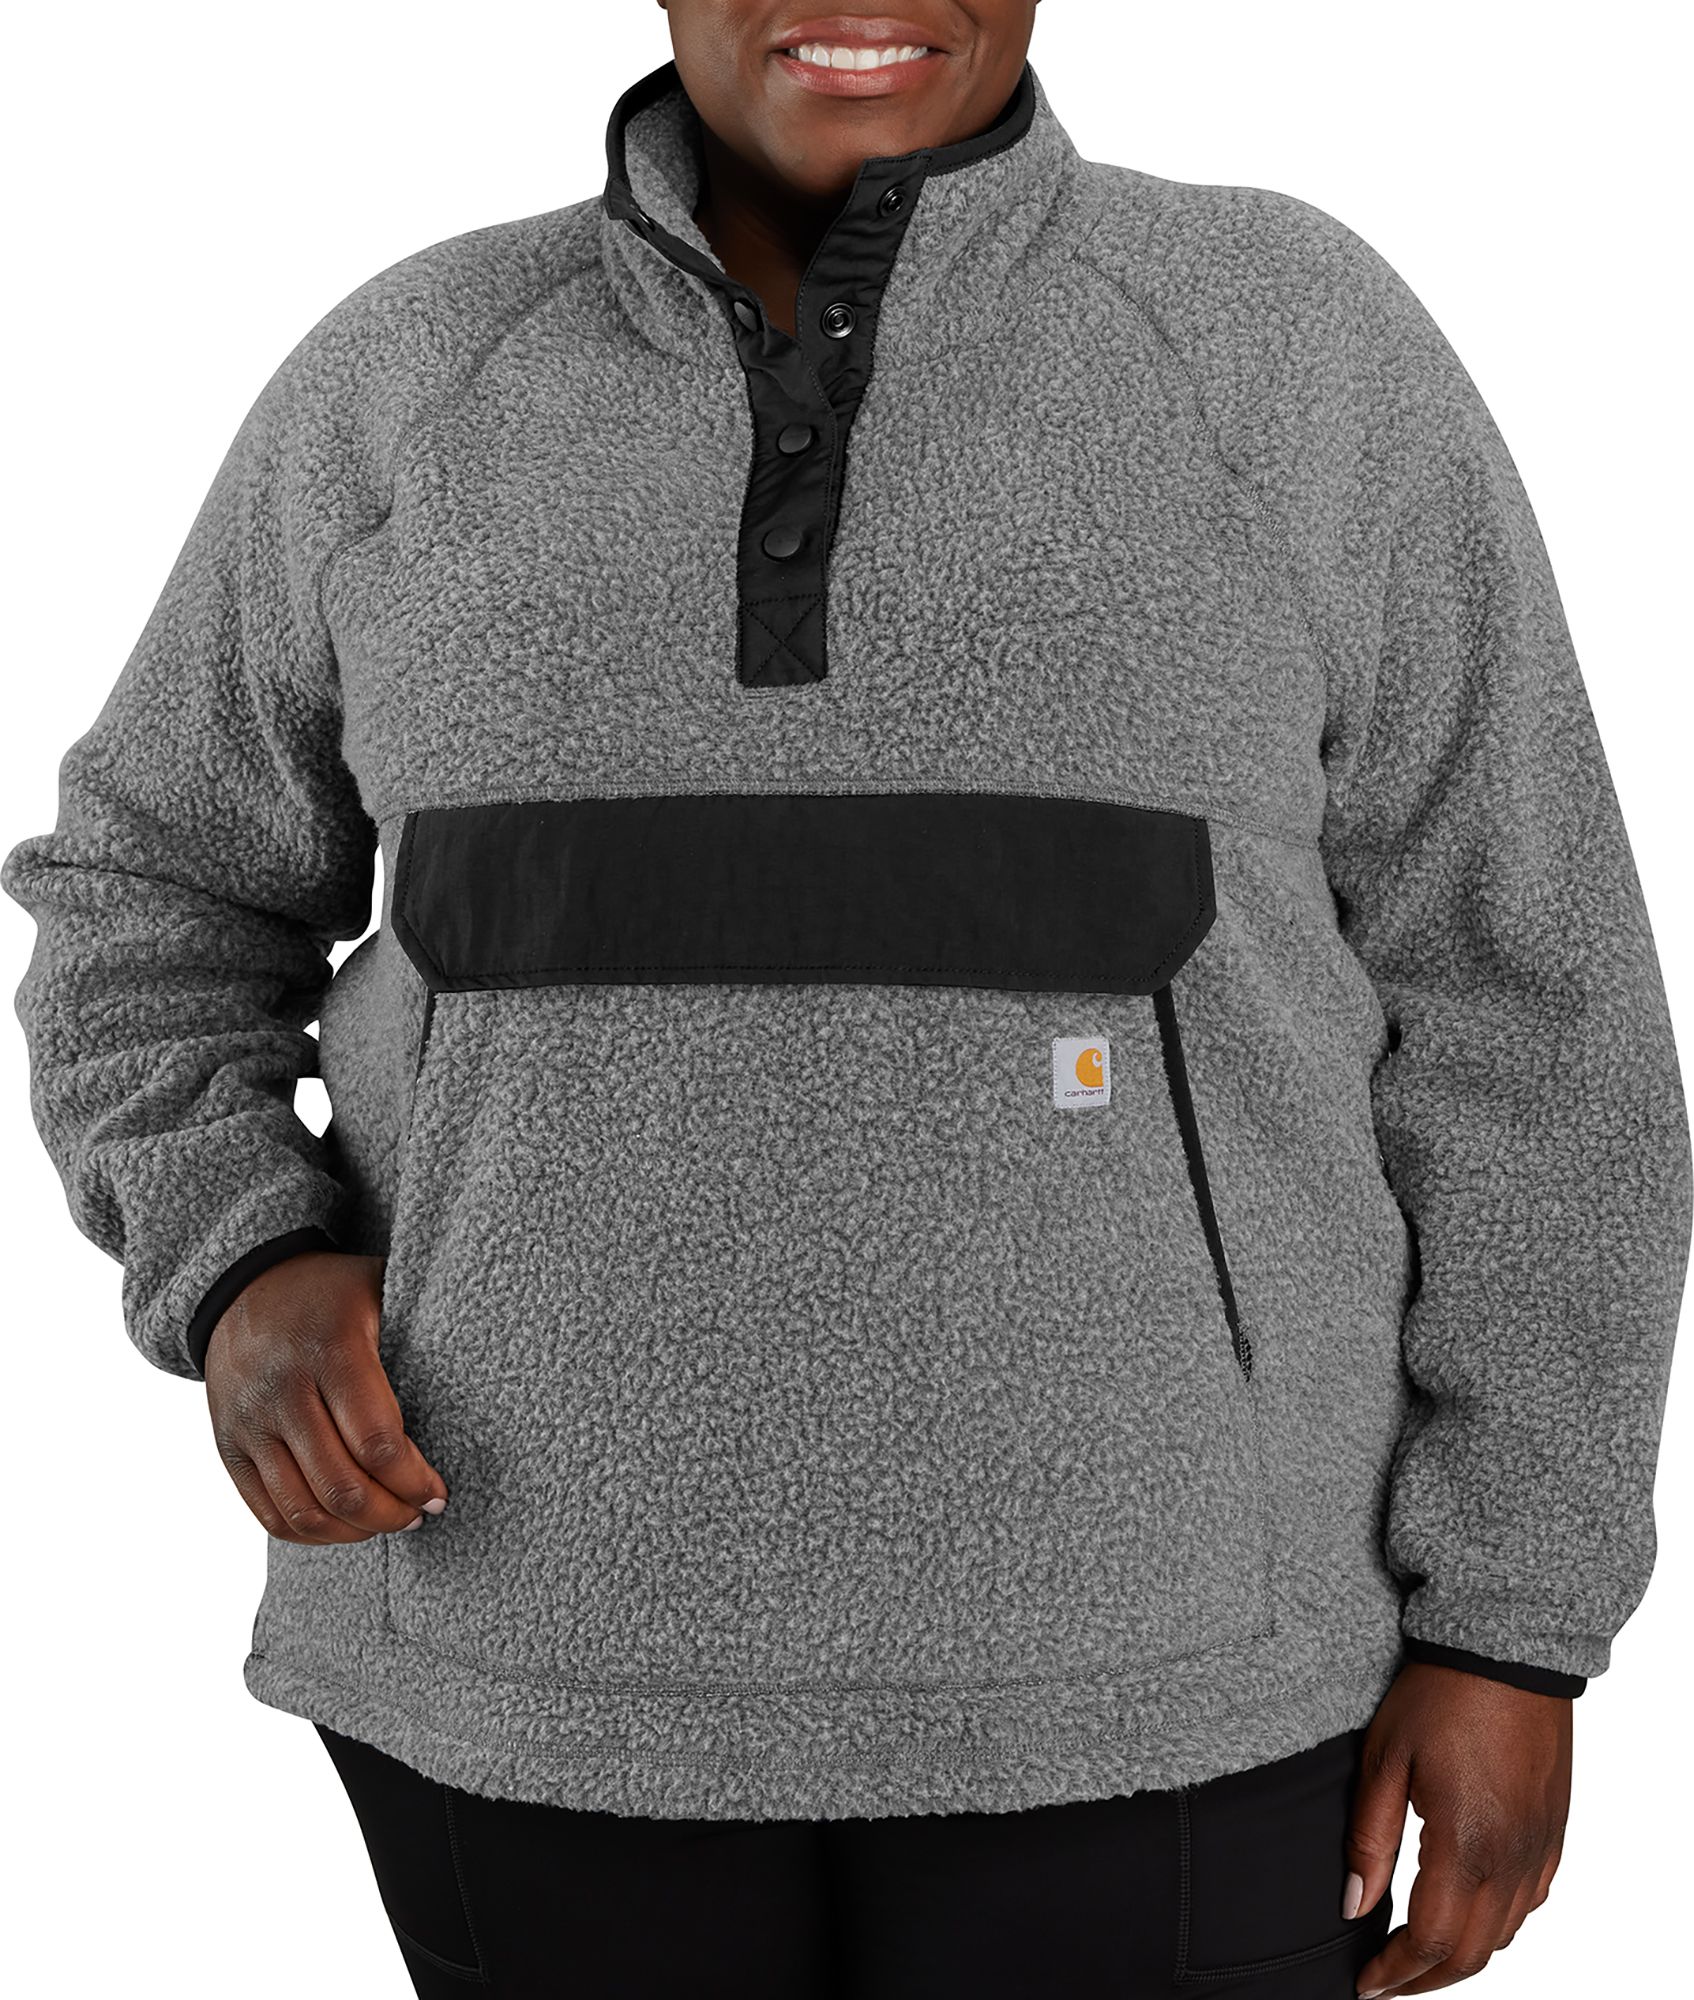 The North Face Women's Garment Dye Mock Neck Pullover | Dick's